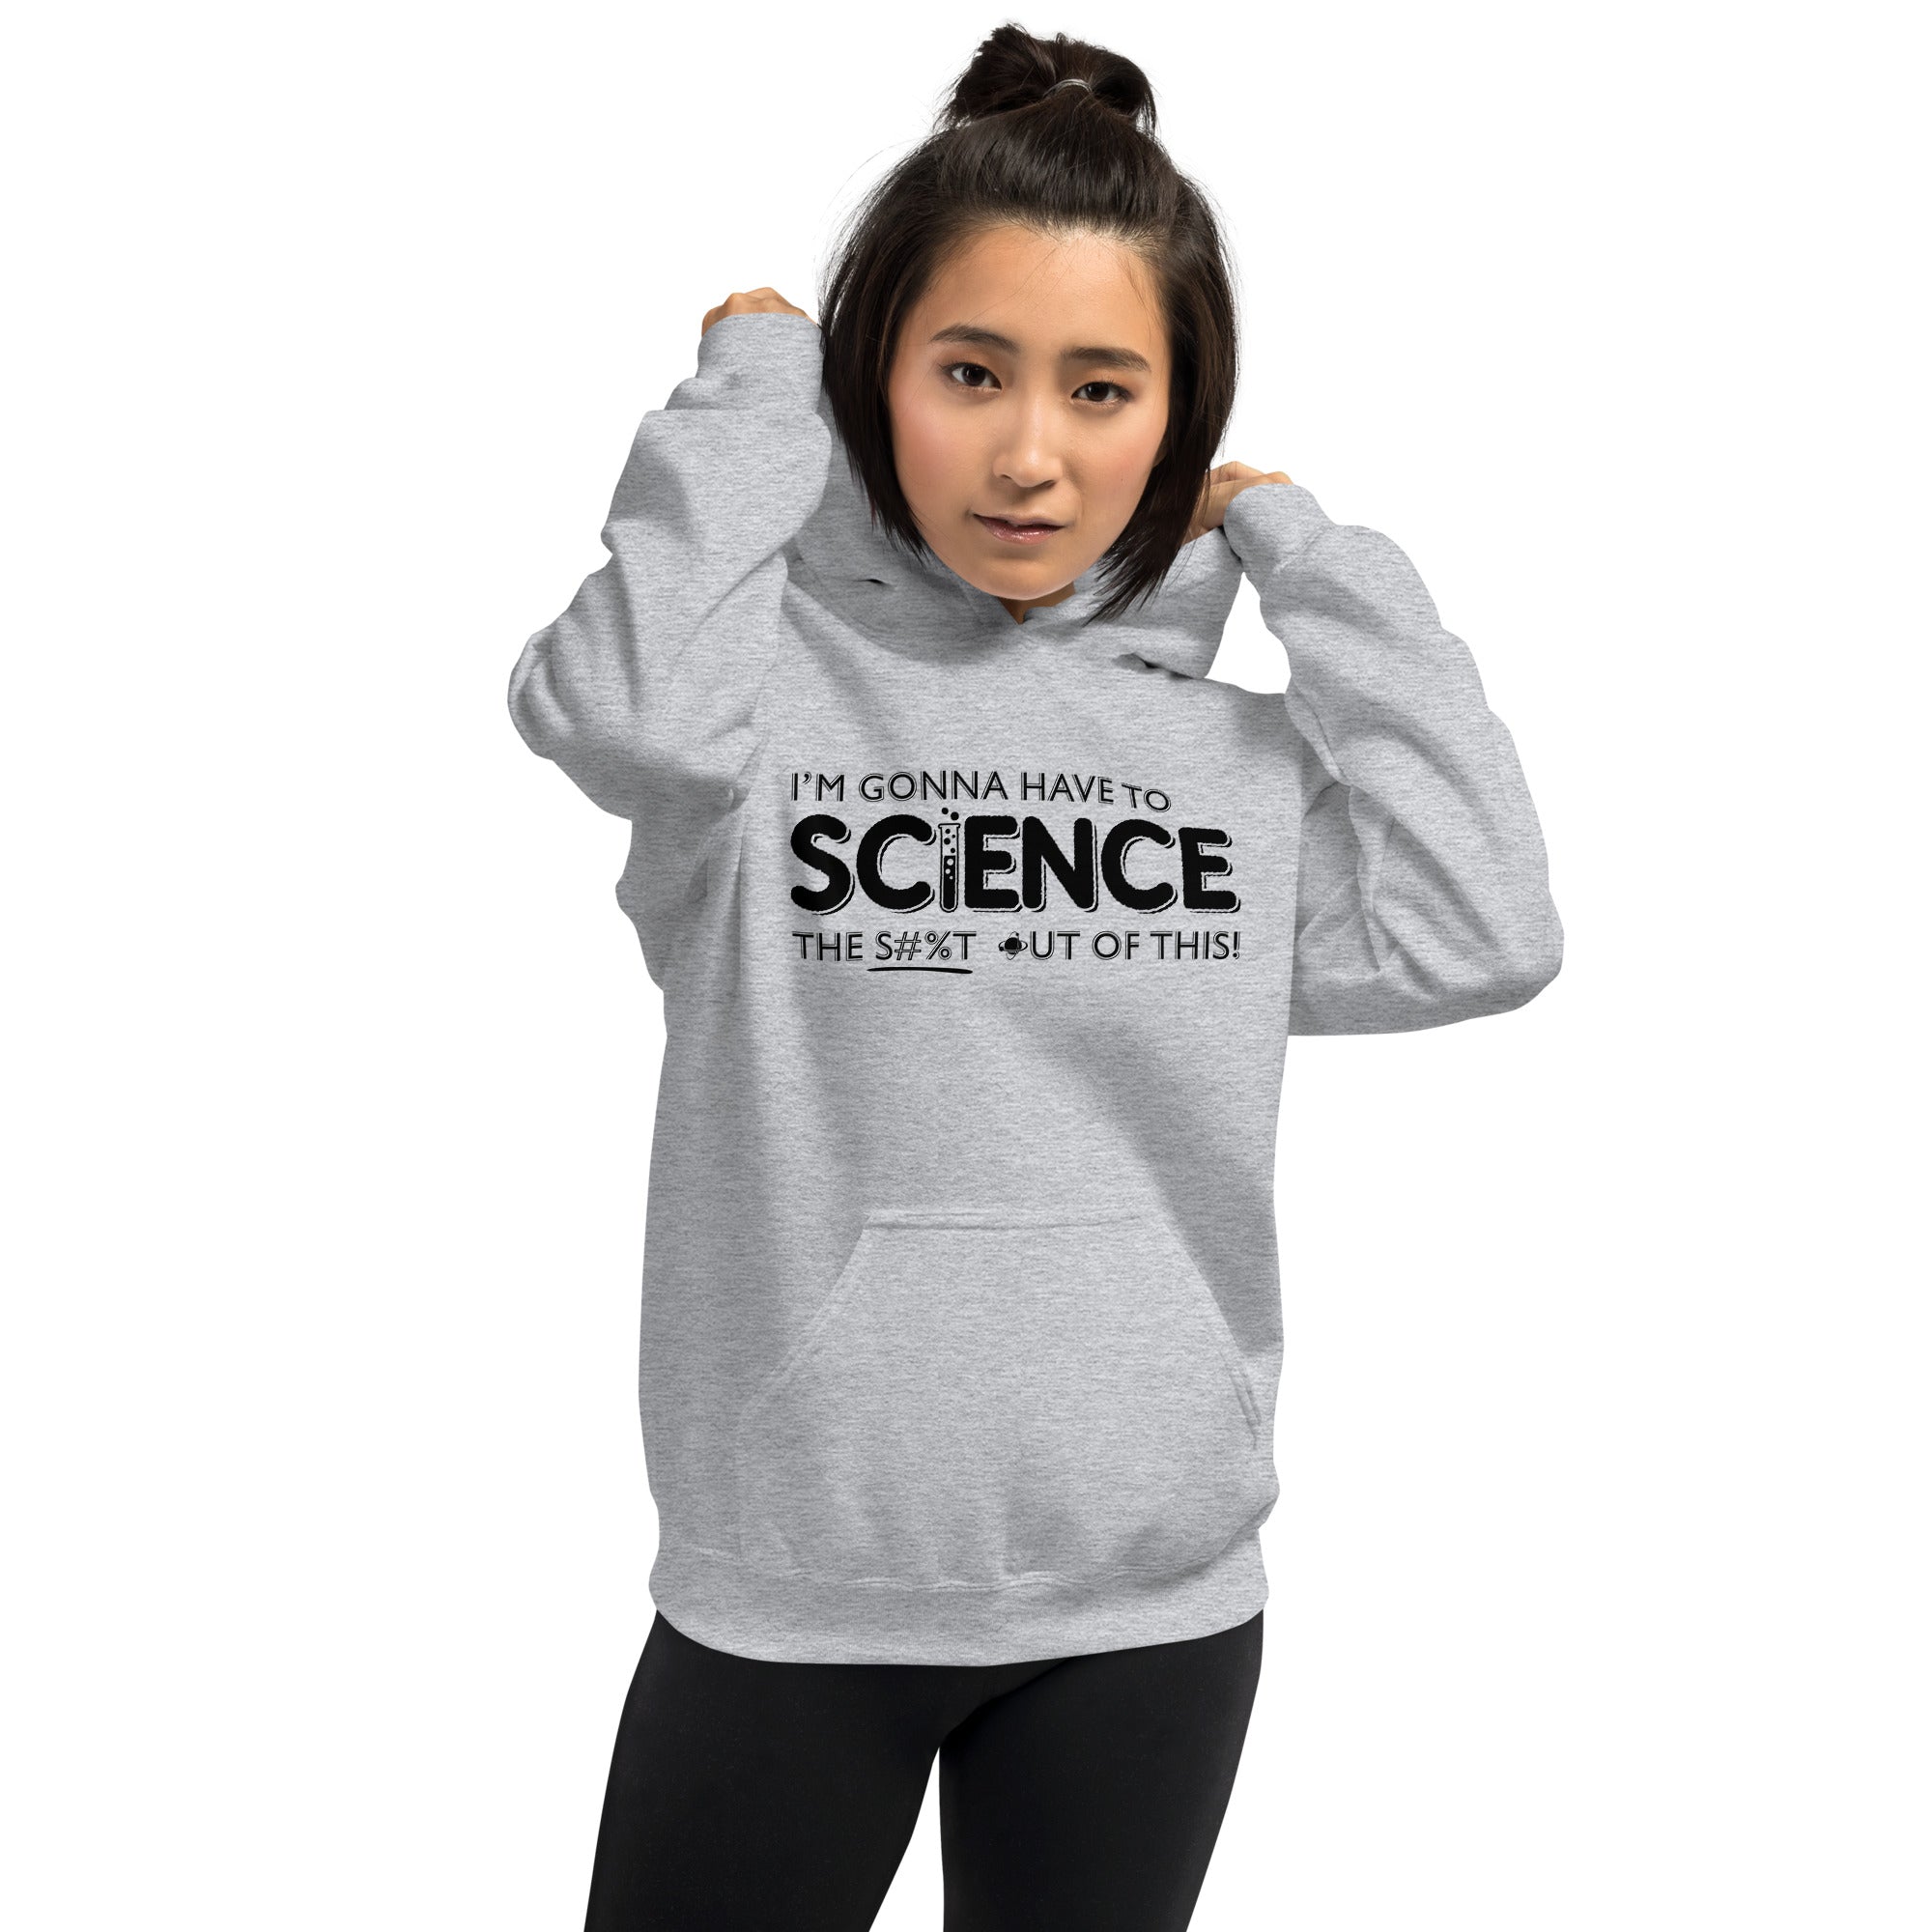 Science The Shit Out of This - Unisex Hoodie